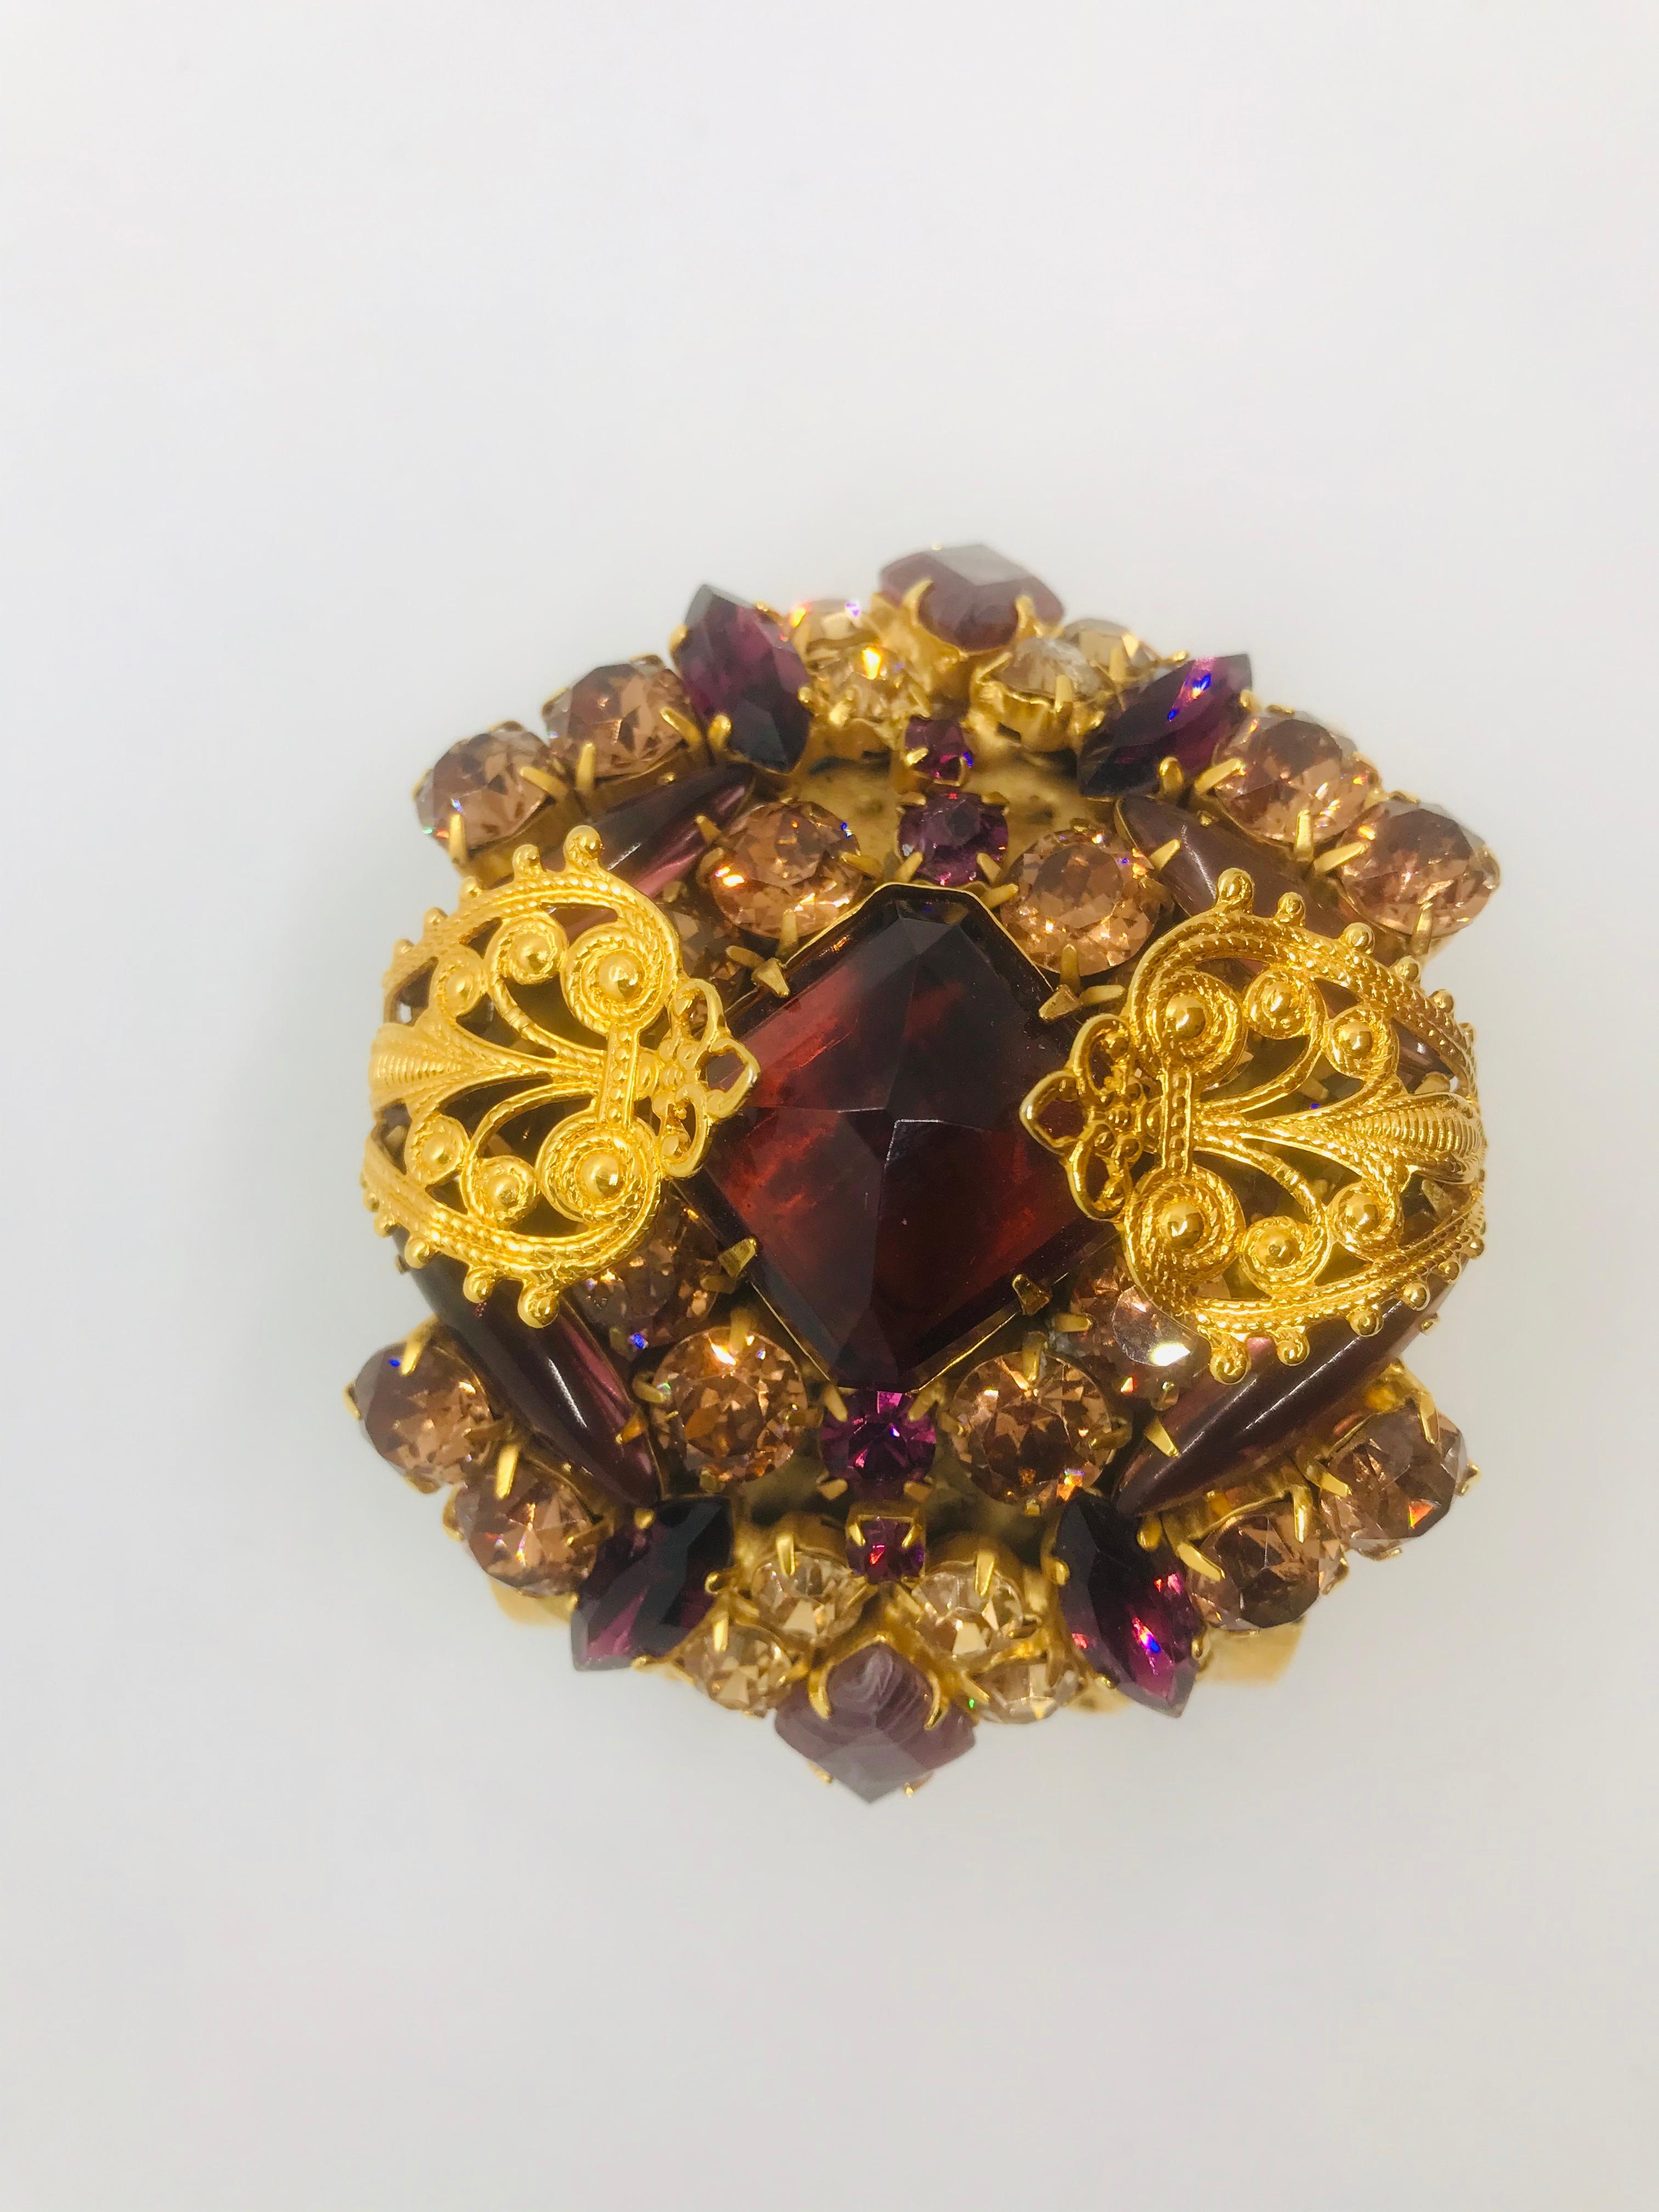 If you love a dramatic bracelet, this smoked topaz and amethyst, Austrian crystal, Byzantine style, open cuff bangle will tick every box.  Ornate gold metal filigree mounts swirl over the top of the jeweled center of this cuff.  A mix of smoked